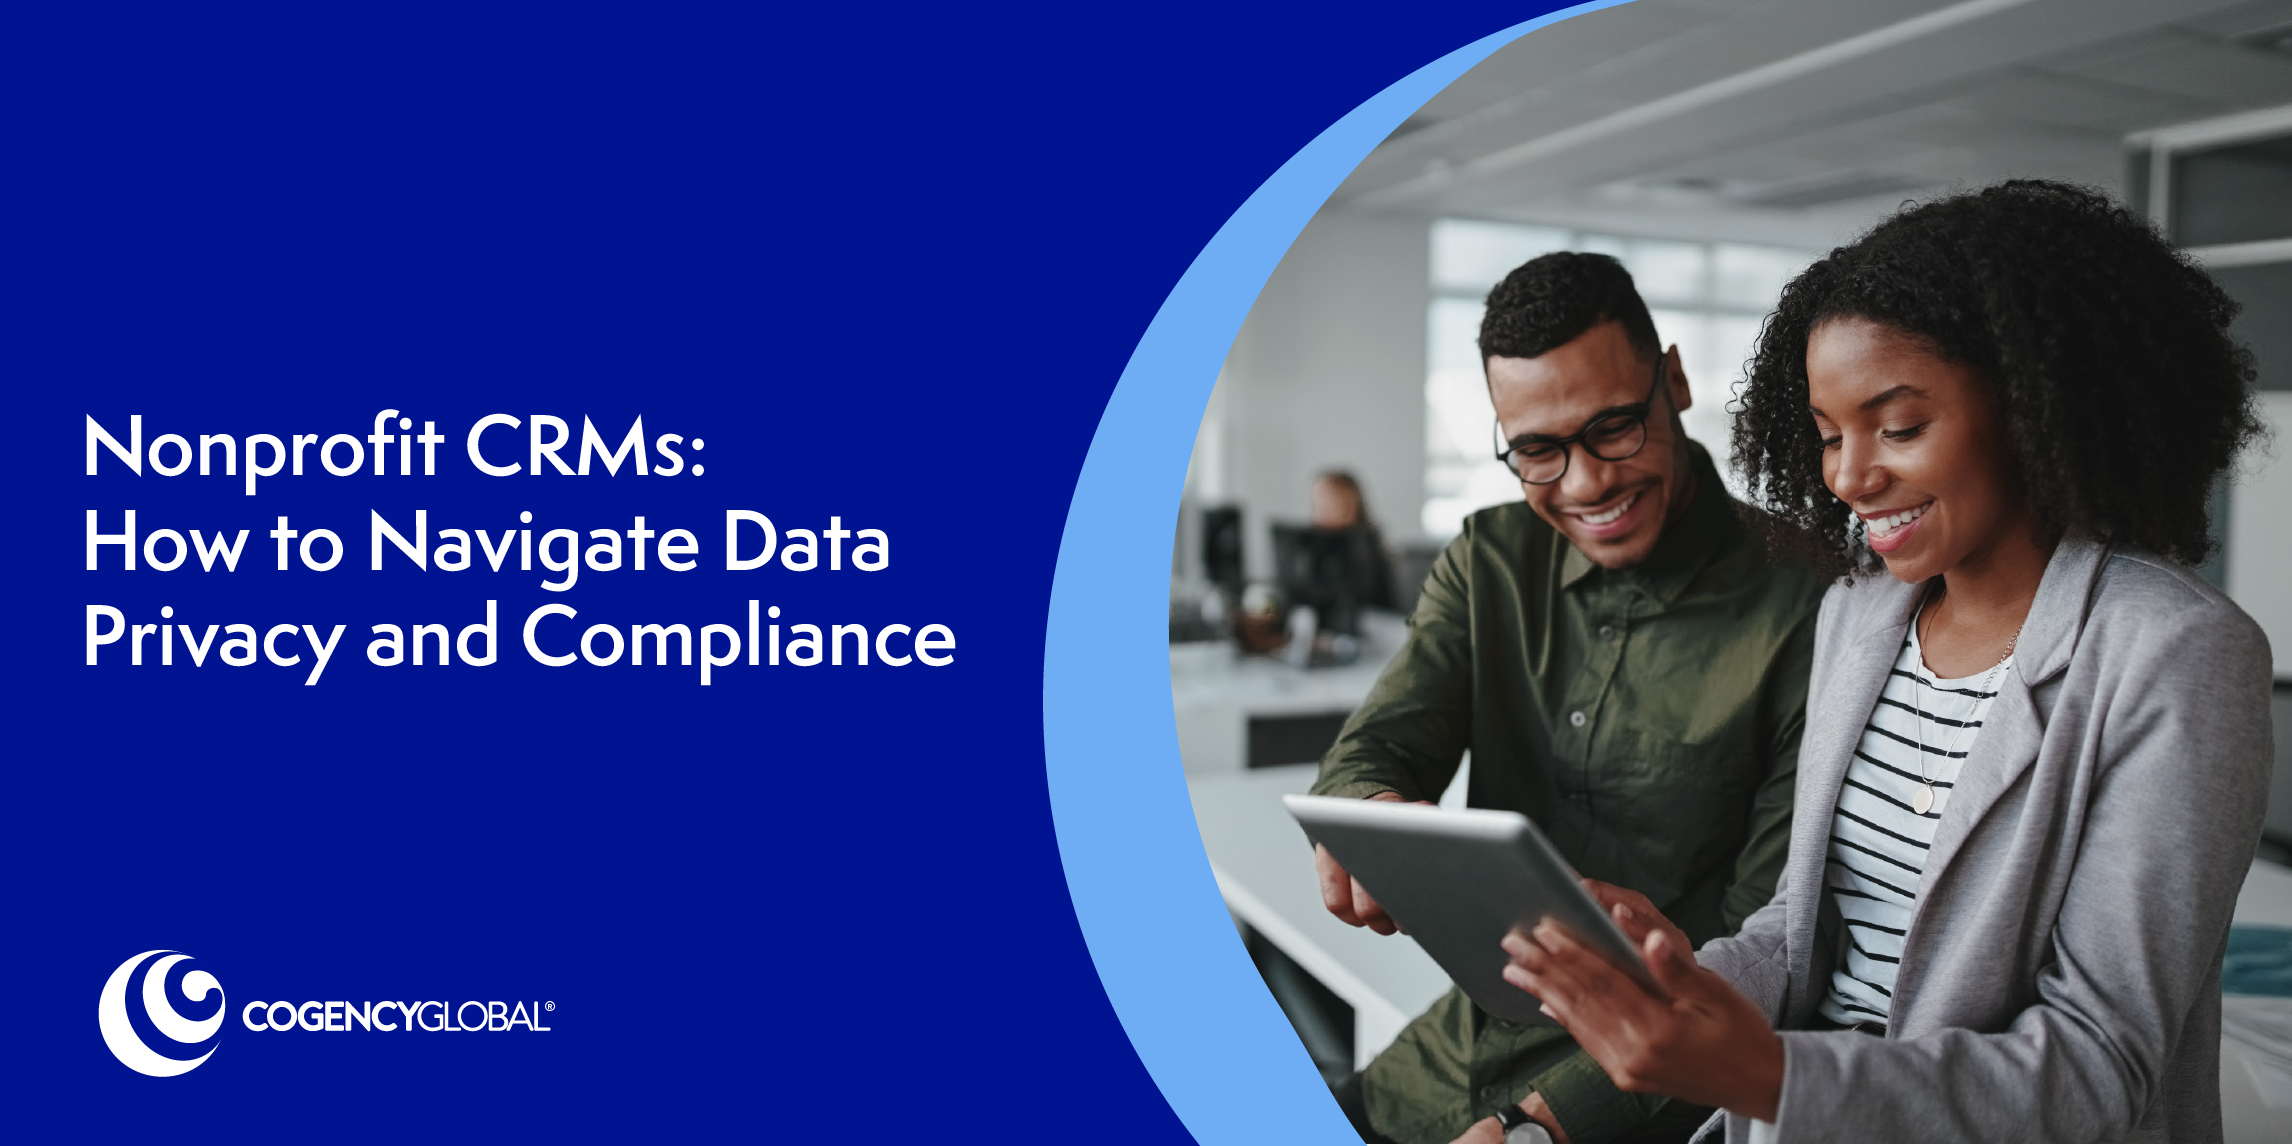 Nonprofit CRMs: How to Navigate Data Privacy and Compliance